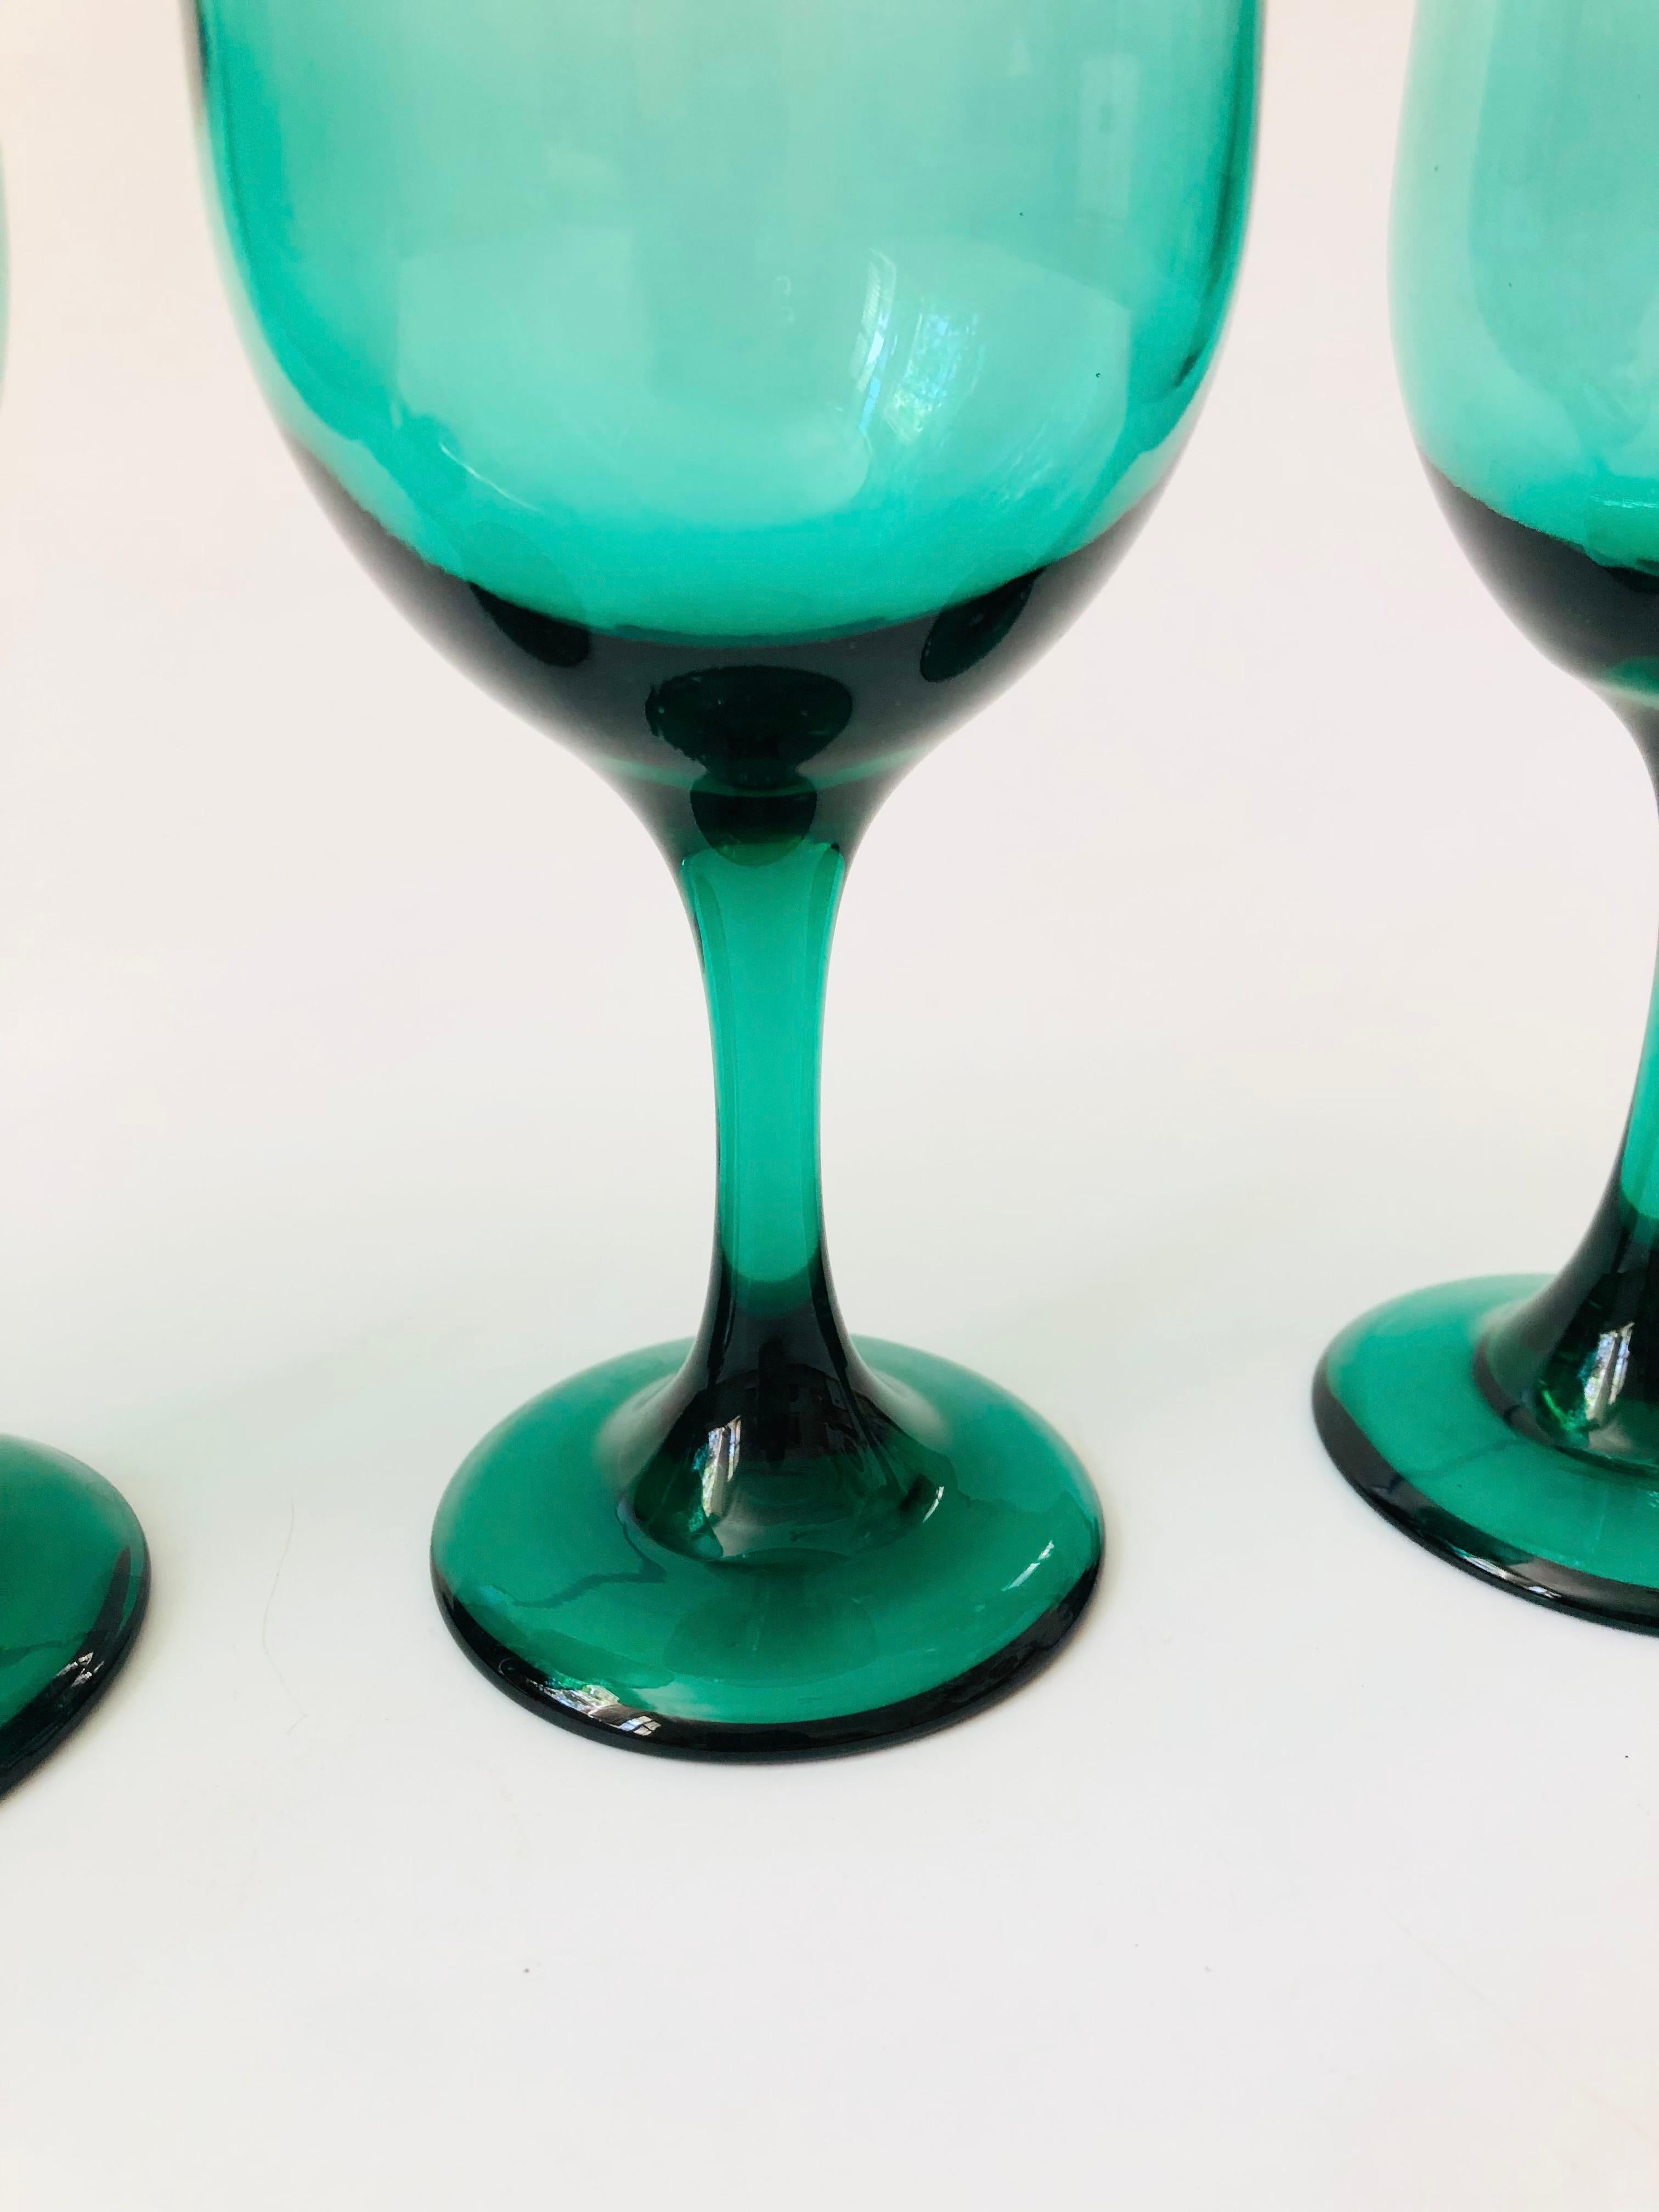 Emerald Green Wine Glasses - Set of 4 In Good Condition For Sale In Vallejo, CA